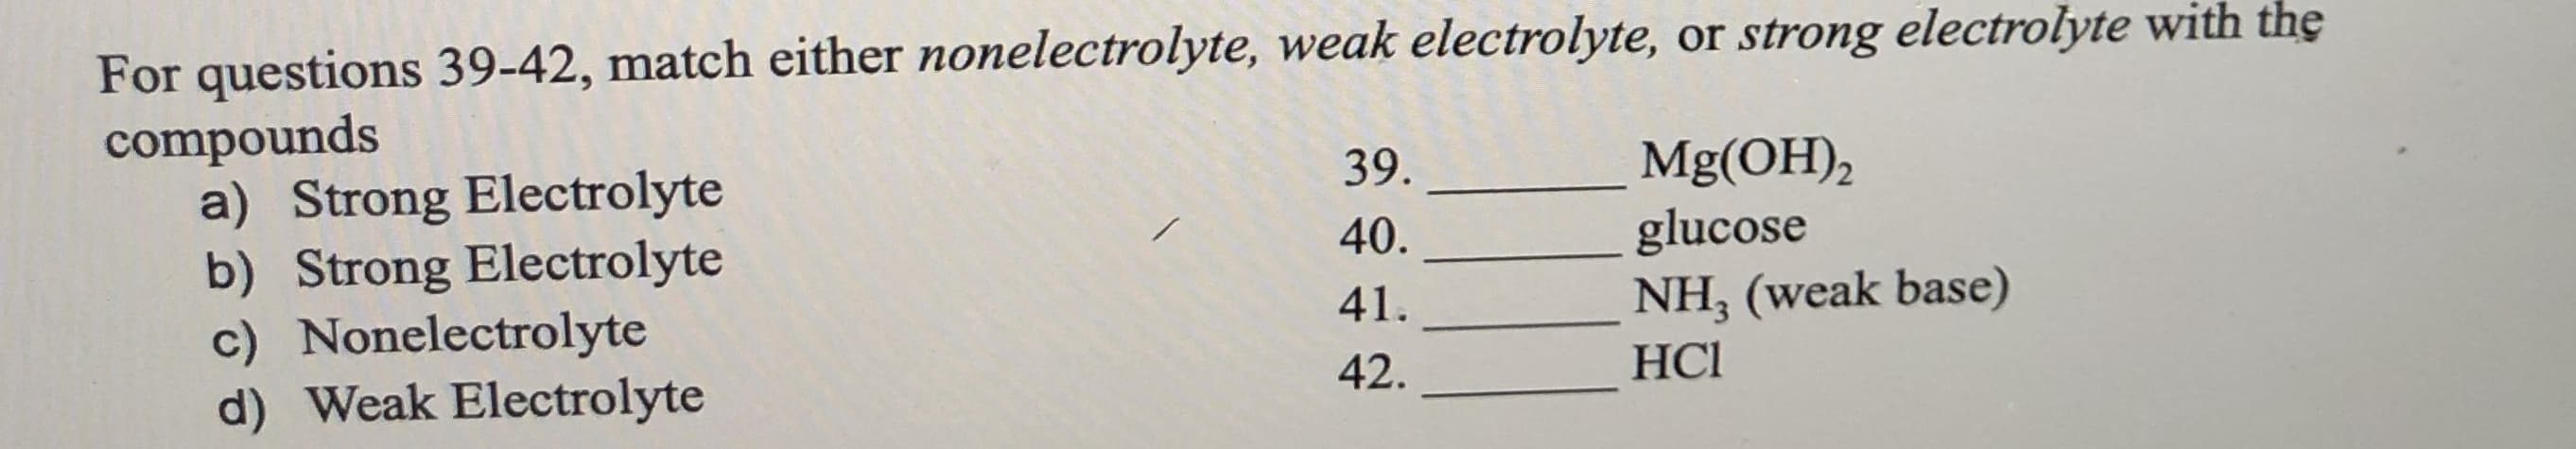 For questions 39-42, match either nonelectrolyte, weak electrolyte, or strong electrolyte with the
compounds
a) Strong Electrolyte
b) Strong Electrolyte
c) Nonelectrolyte
d) Weak Electrolyte
Mg(OH),
glucose
NH, (weak base)
39.
40.
41.
42.
HCl
